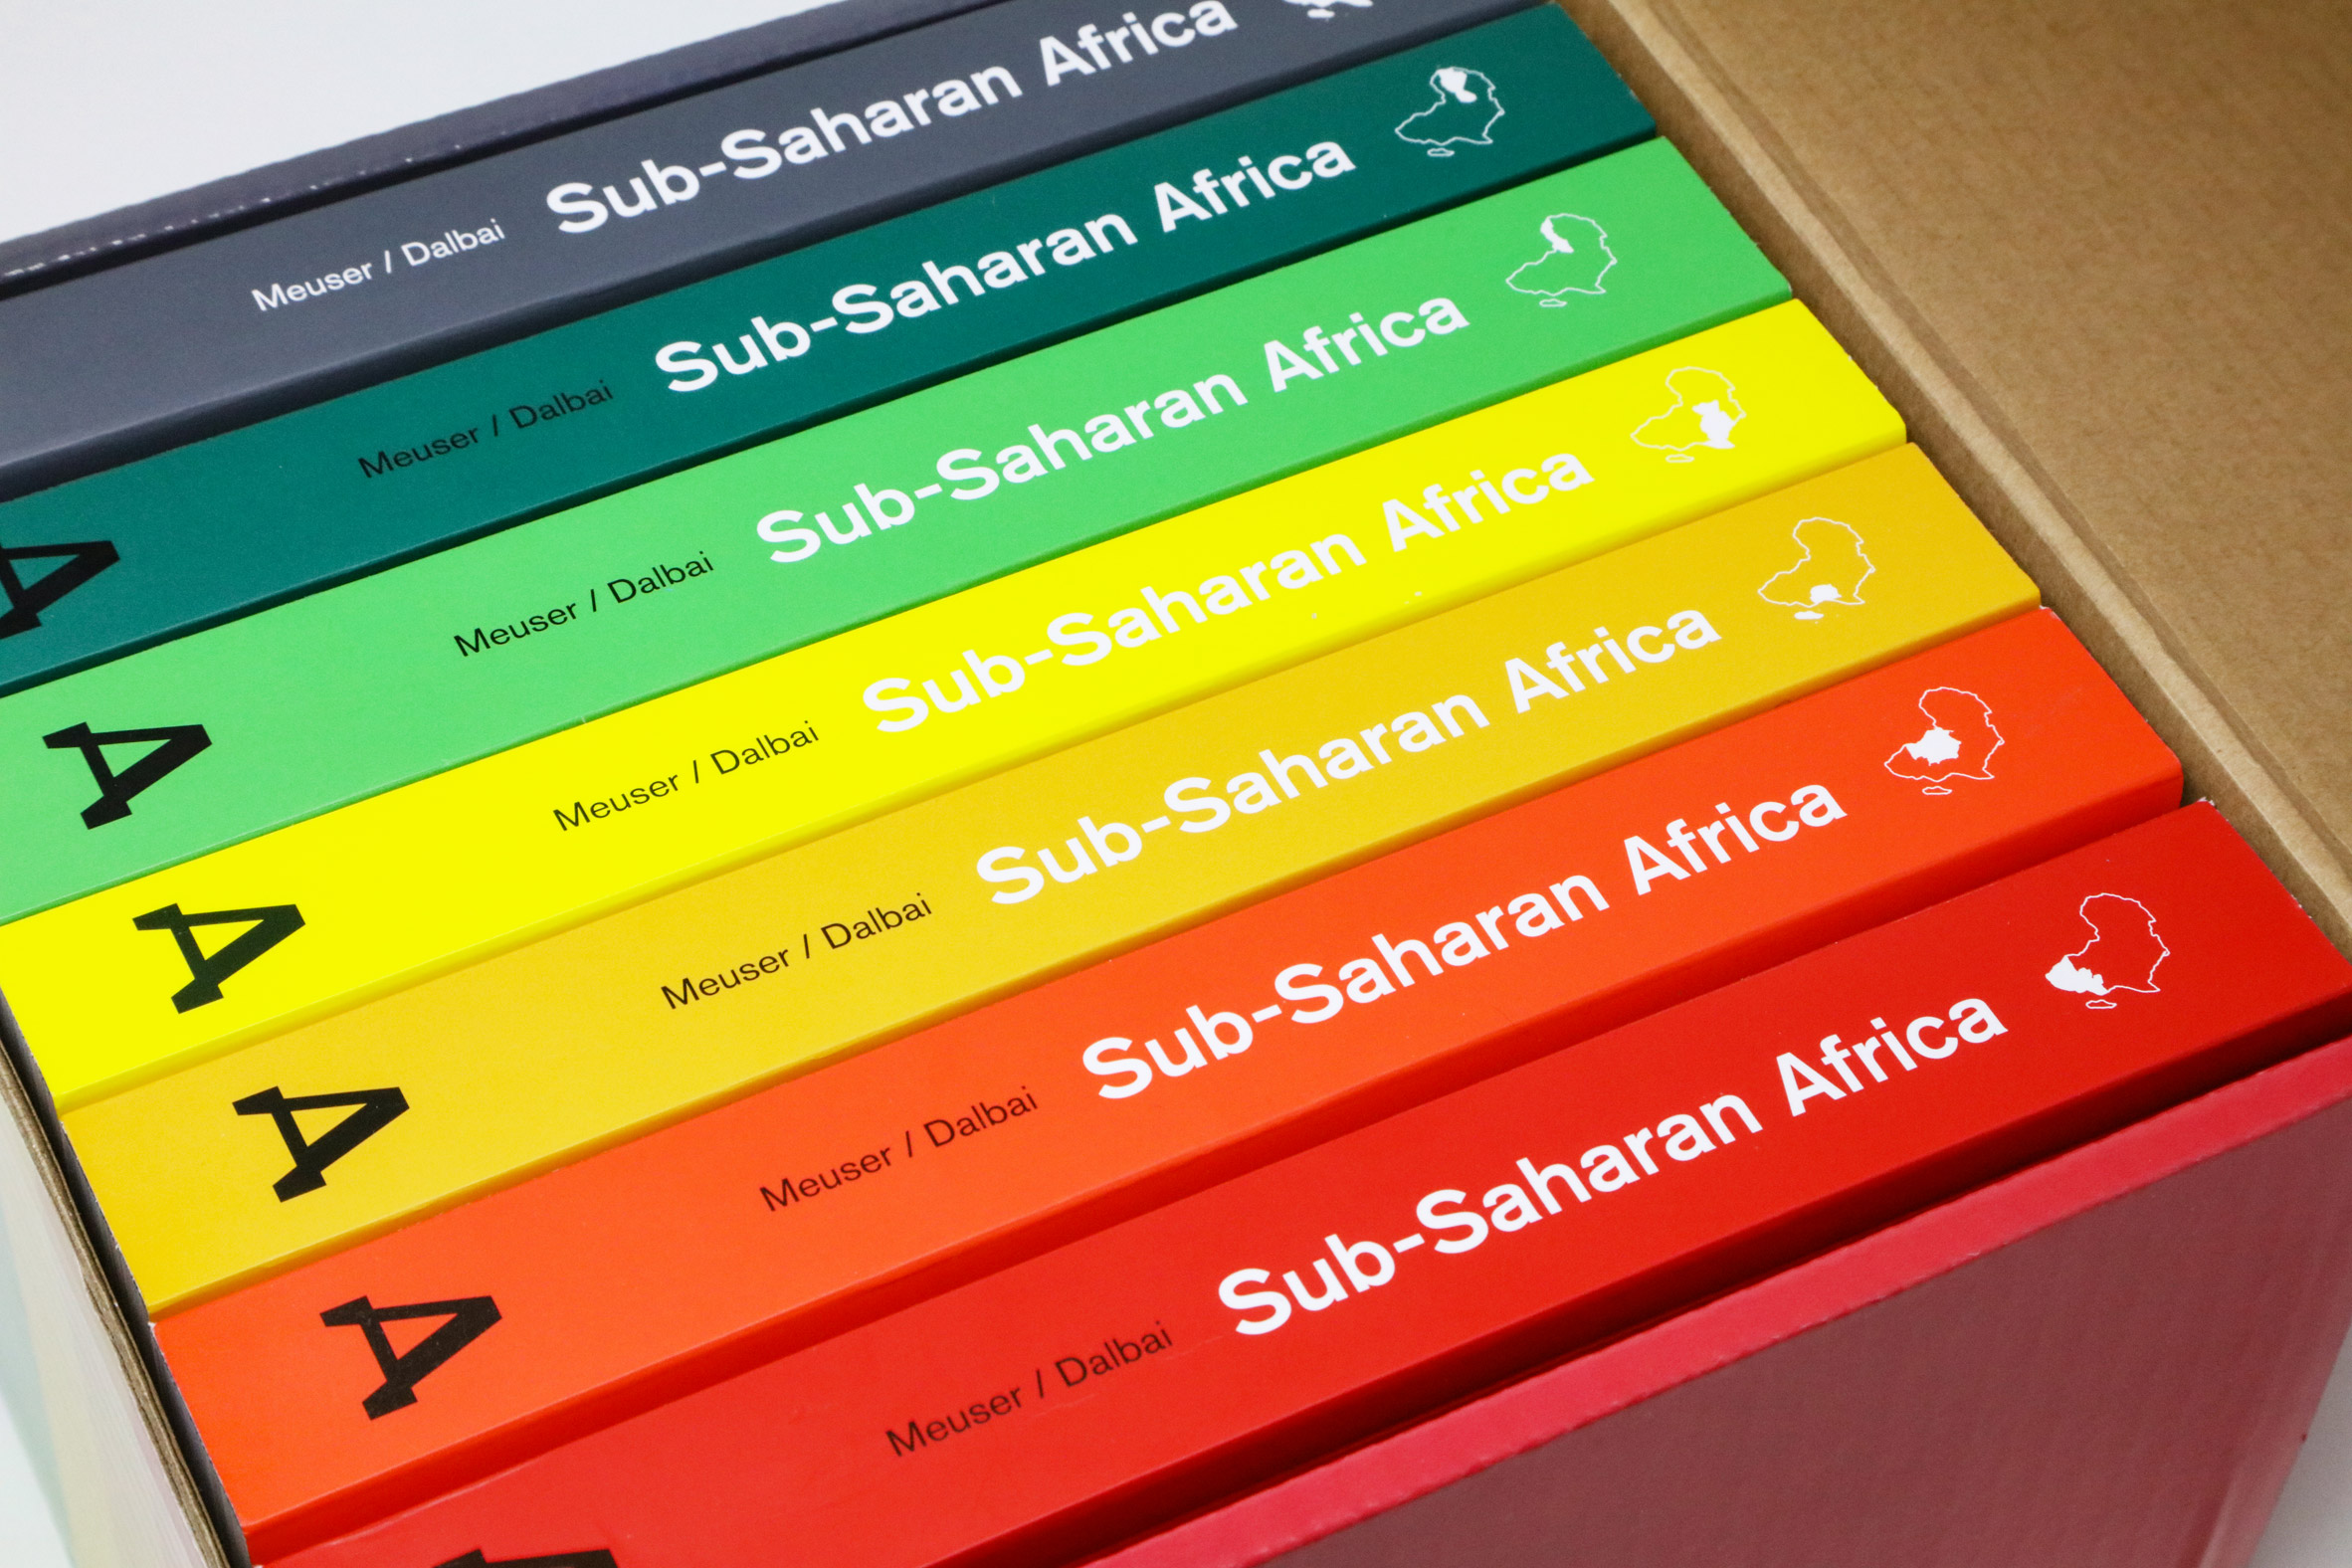 Sub-Saharan Africa Architectural Guide